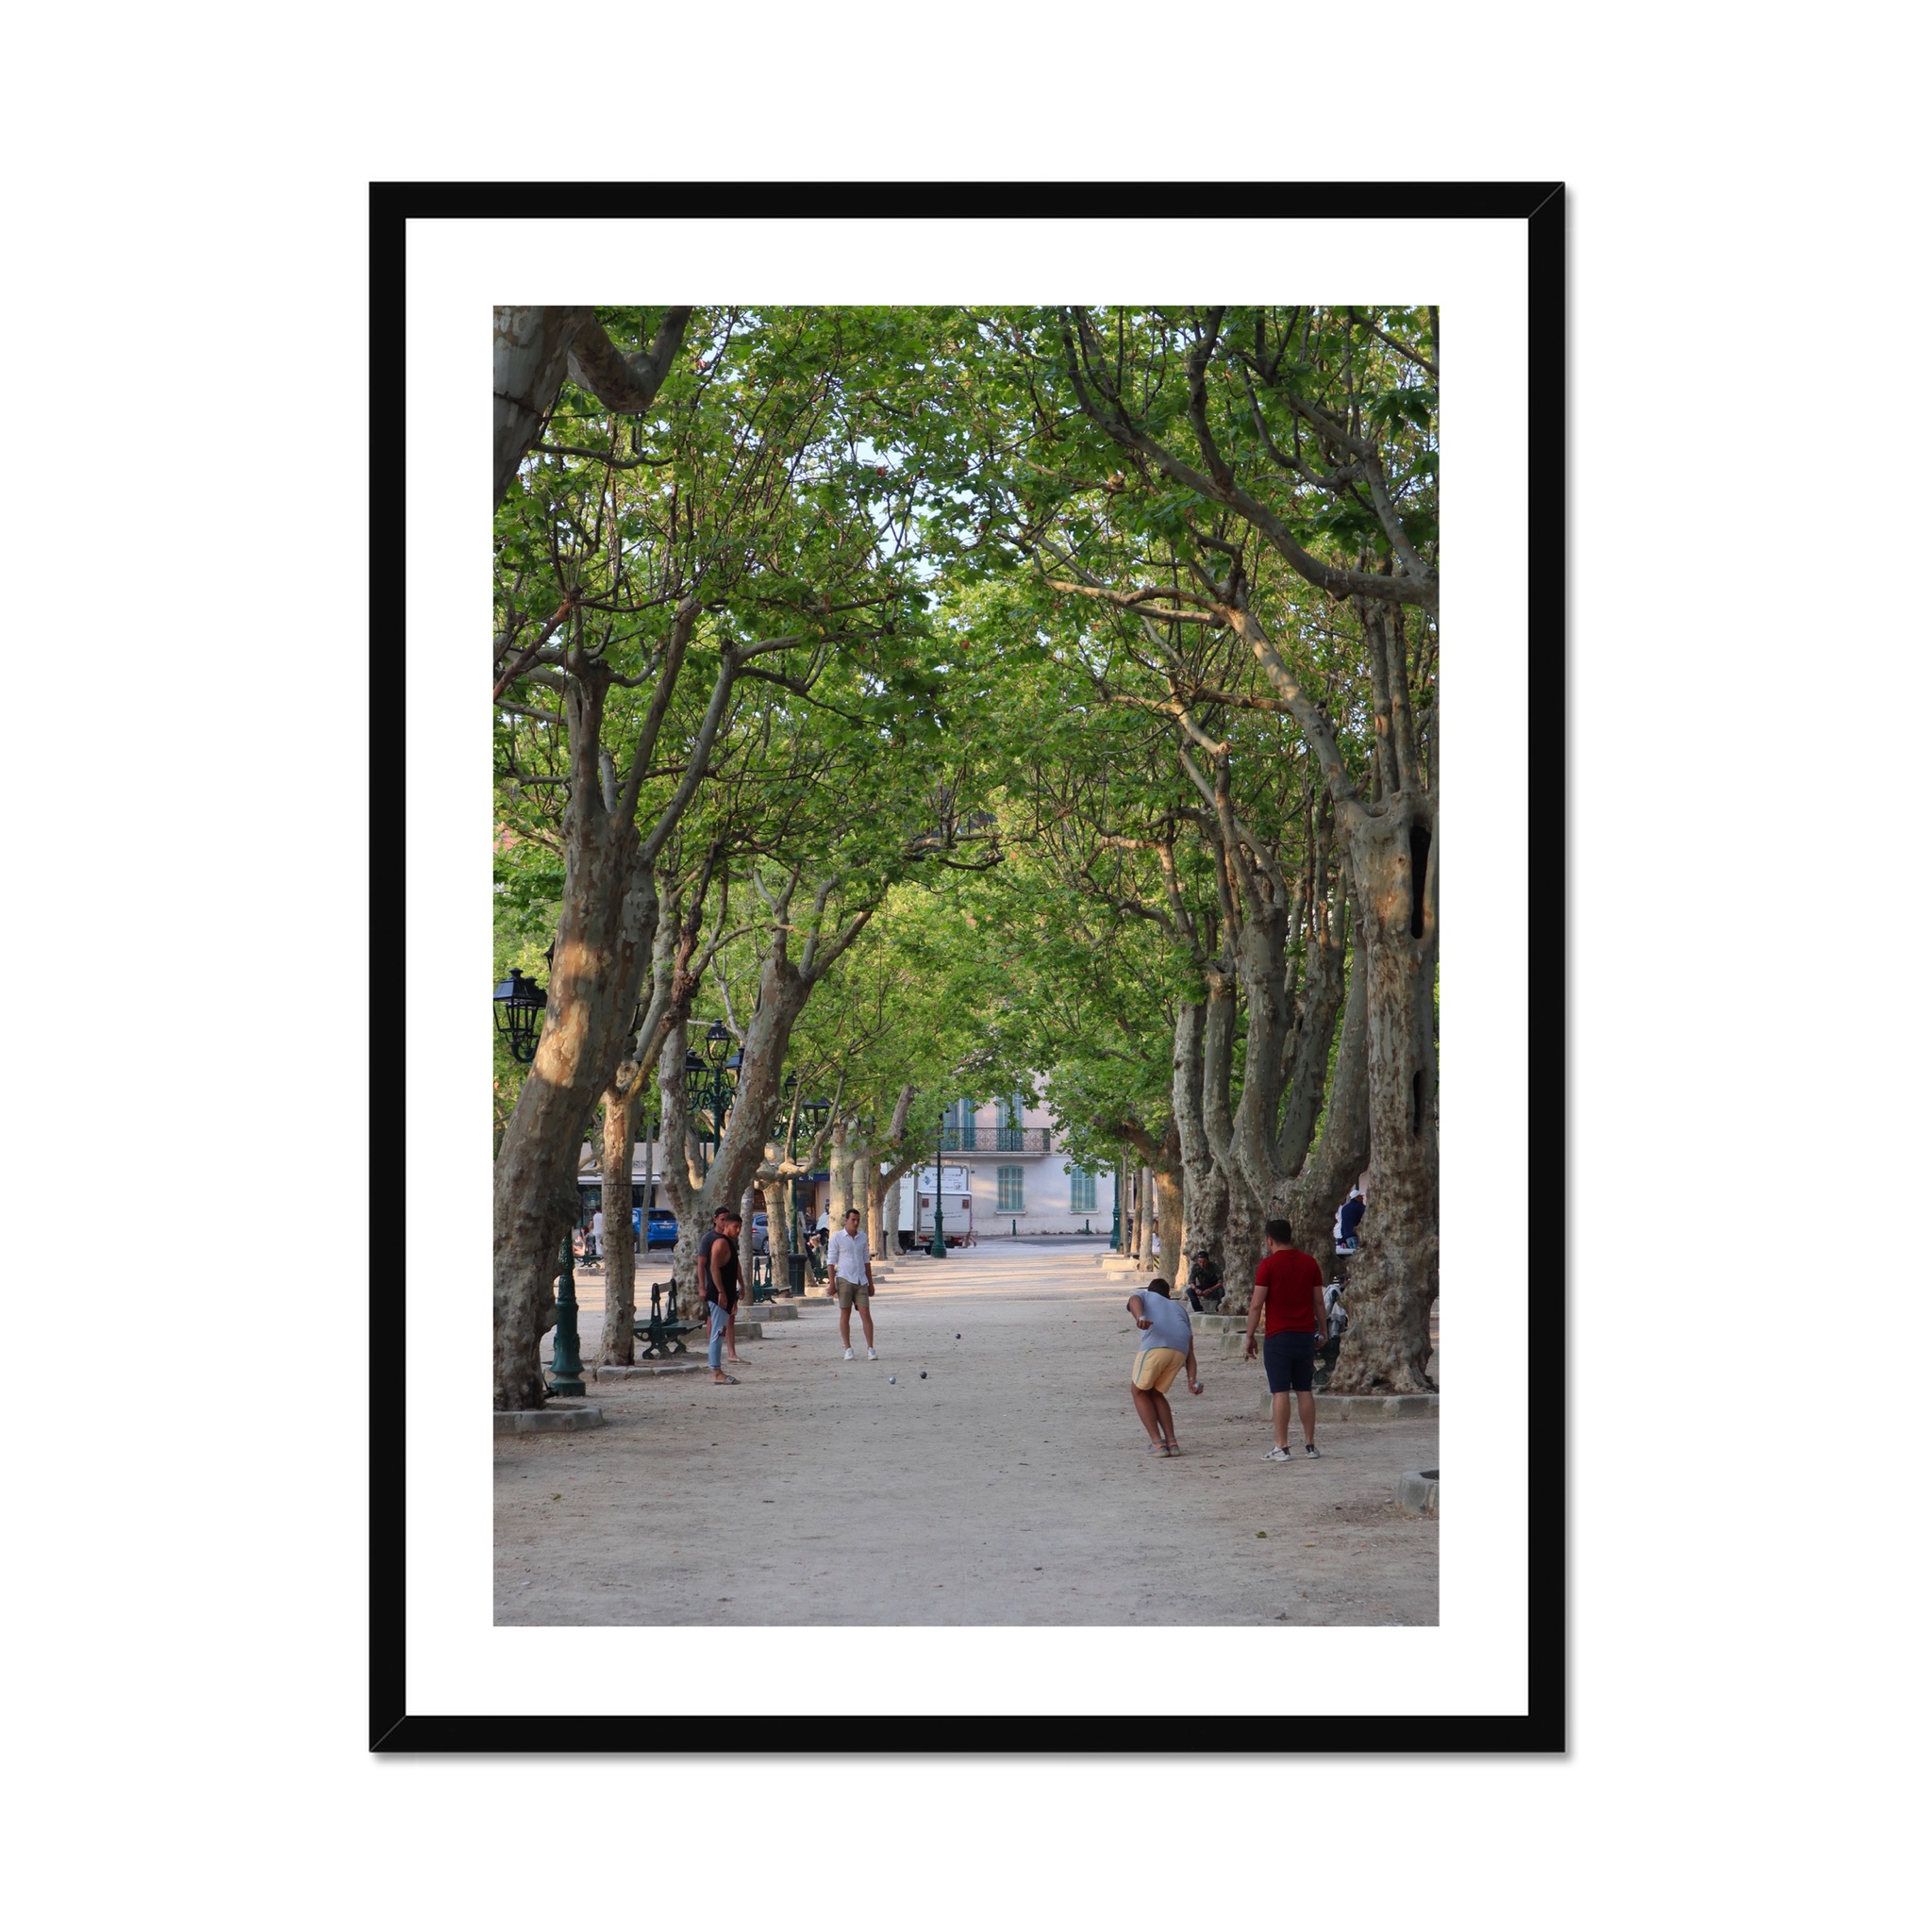 South of France Photos framed print - Playing boules in Saint Tropez square